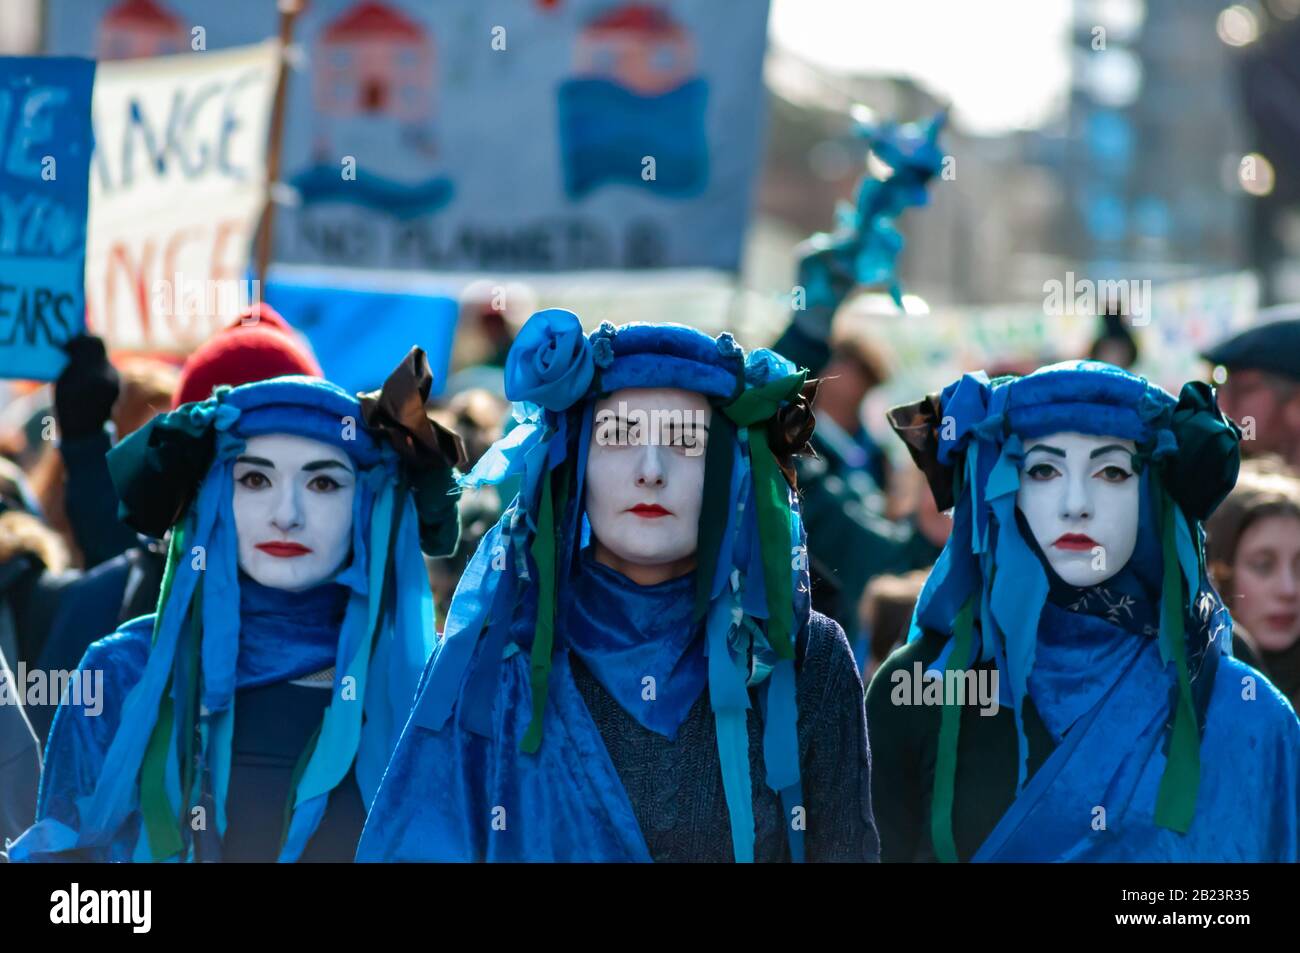 Glasgow, Scotland, UK. 29th February, 2020. The Blue Rebels leading the Blue Wave protest by the environmental campaign group Extinction Rebellion (XR) which saw activists  dressed in blue and green to represent the rising sea levels and flooding caused by increasing global temperatures and climate change. Credit: Skully/Alamy Live News Stock Photo